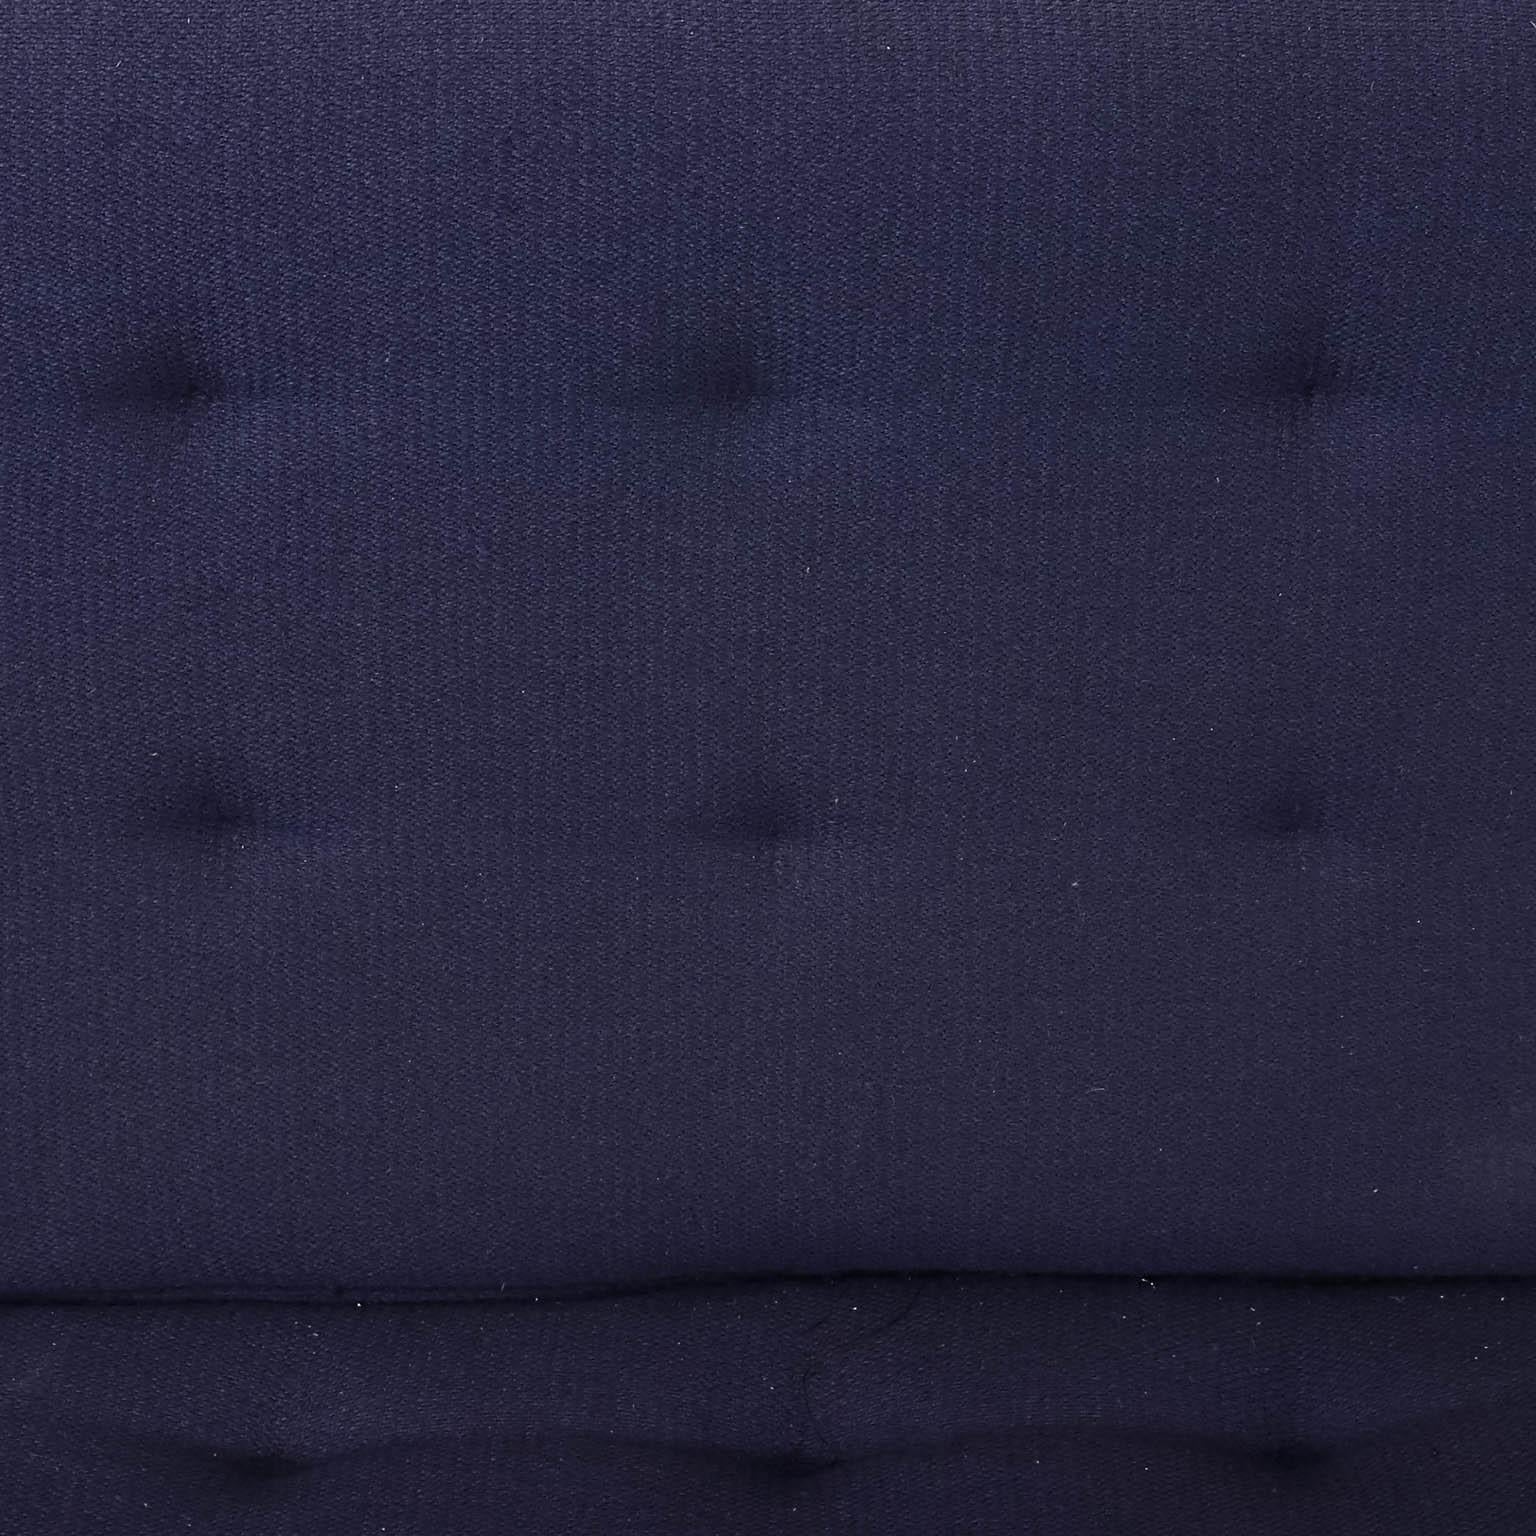 Mid-Century Modern style sofa upholstered in blue by Florence Knoll. The piece also features tufted seating. Please note of wear consistent with age as seen on the upholstery.